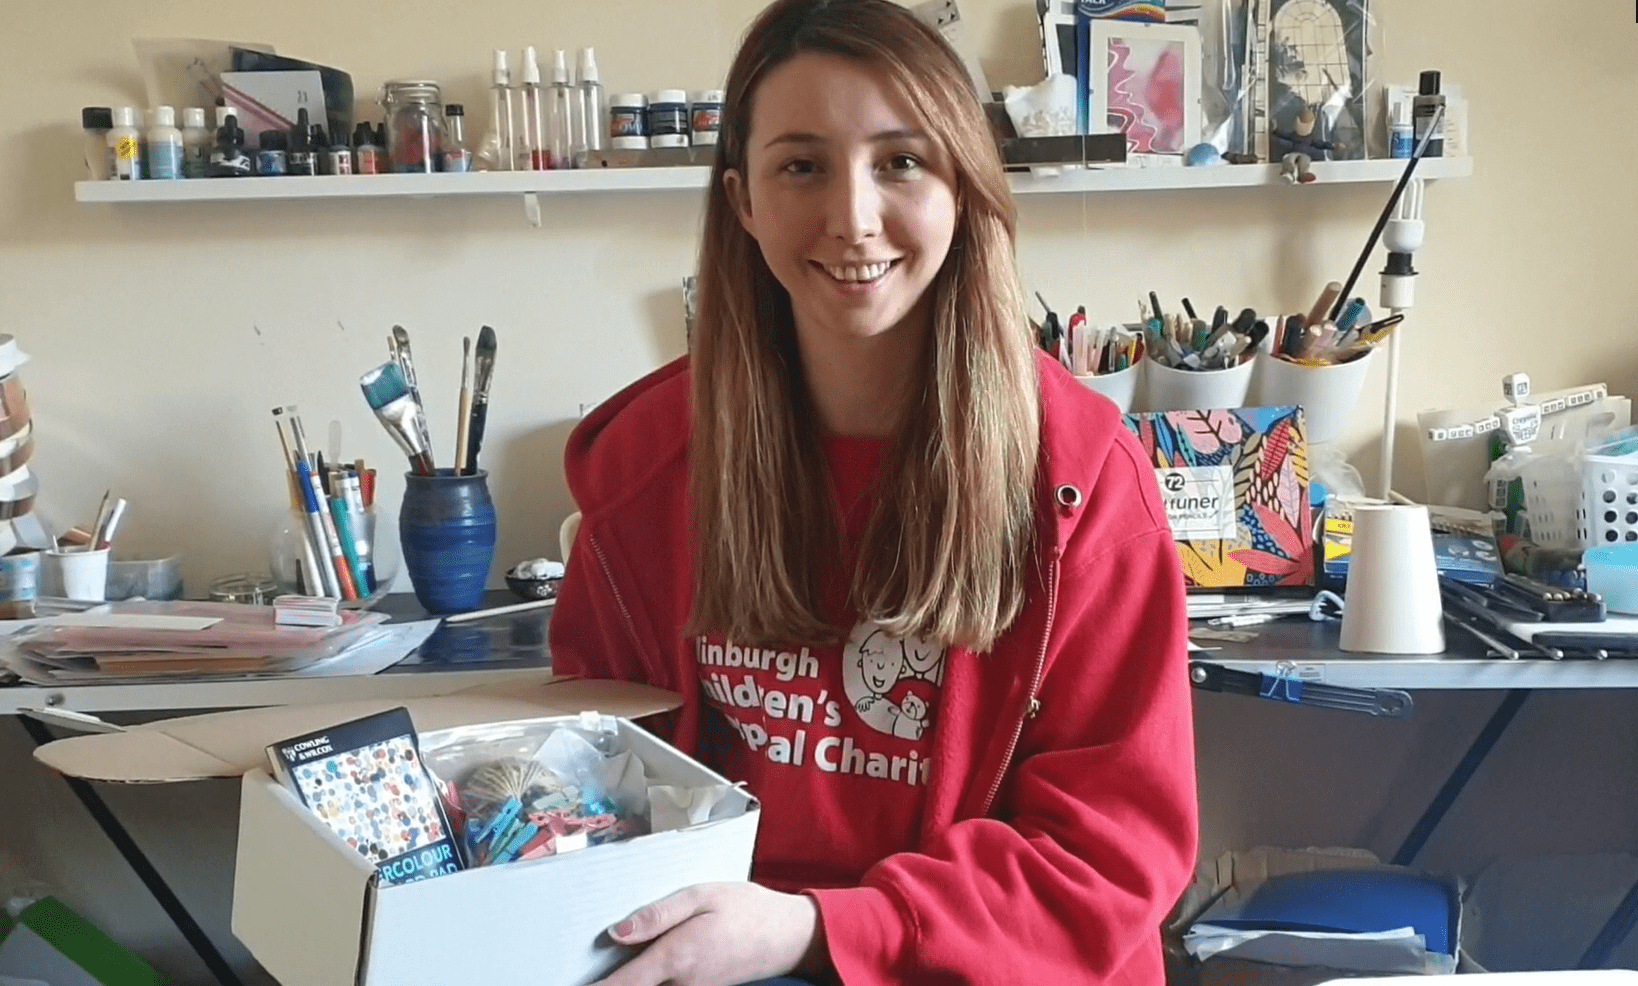 A red-haired young person smiling at the camera holds an Edinburgh Children's Hospital Charity arts and crafts studio box.